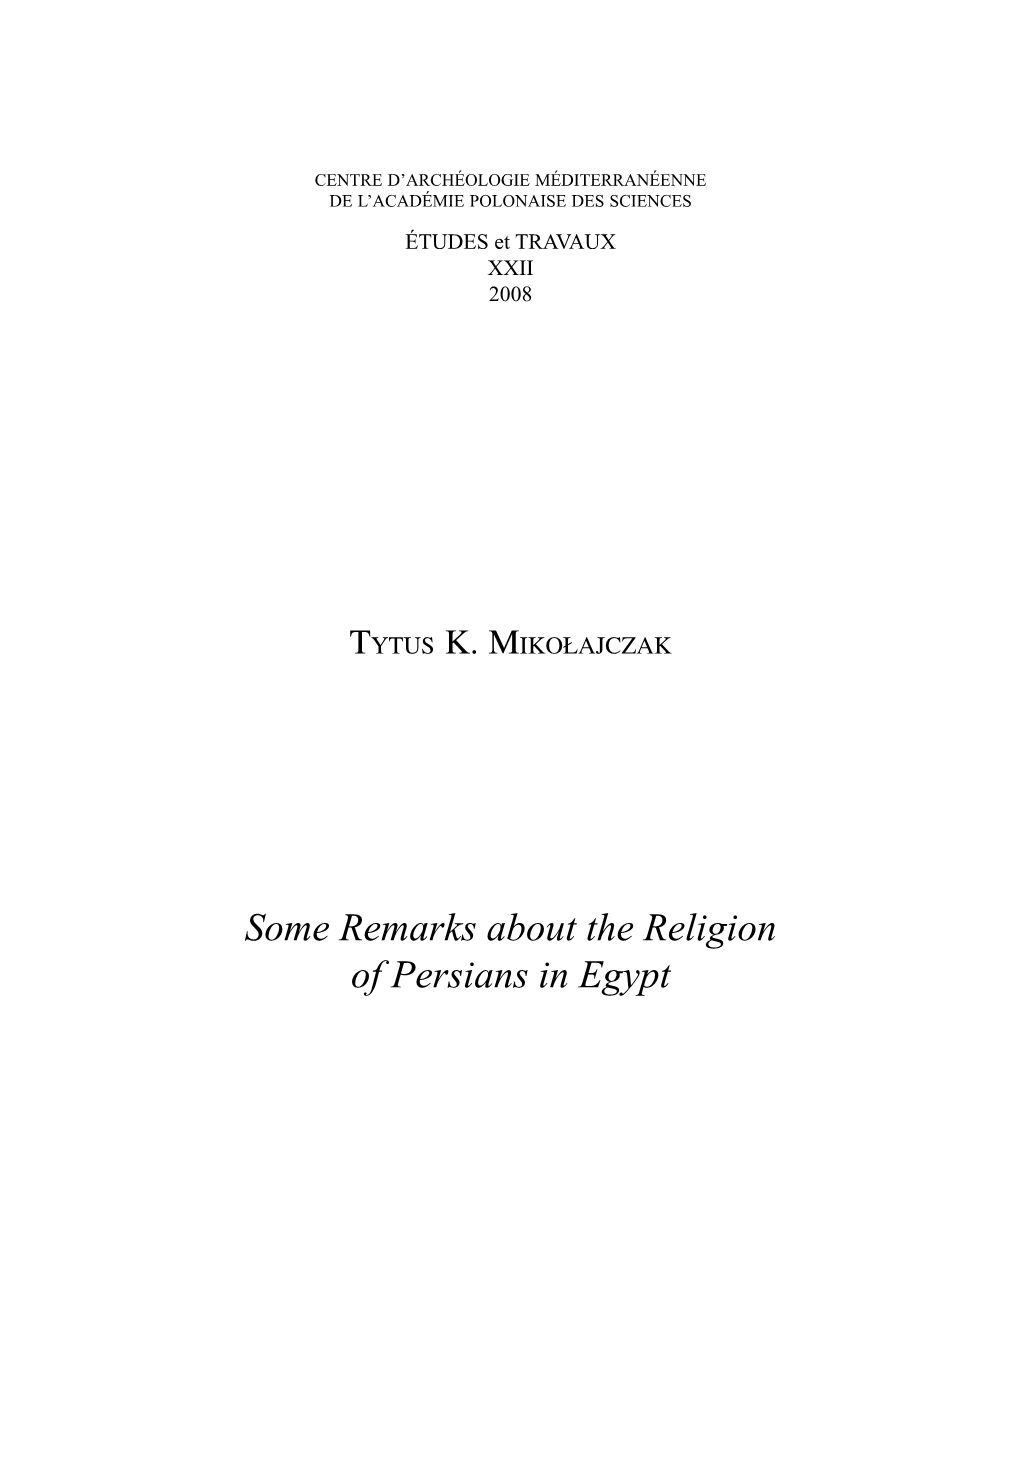 Some Remarks About the Religion of Persians in Egypt 128 TYTUS K